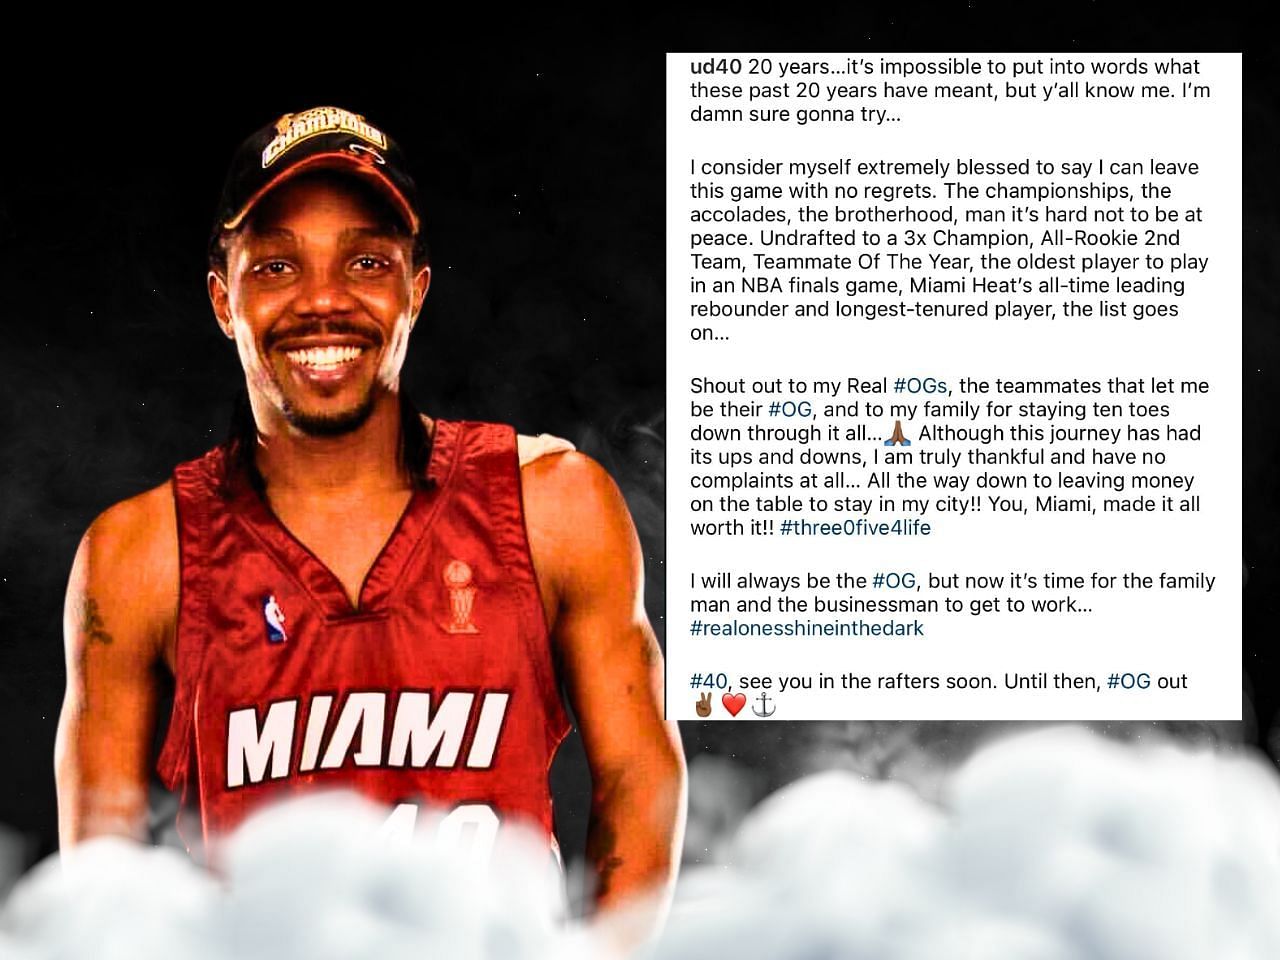 Twenty years of Udonis Haslem in the NBA: 'I would like to say I am